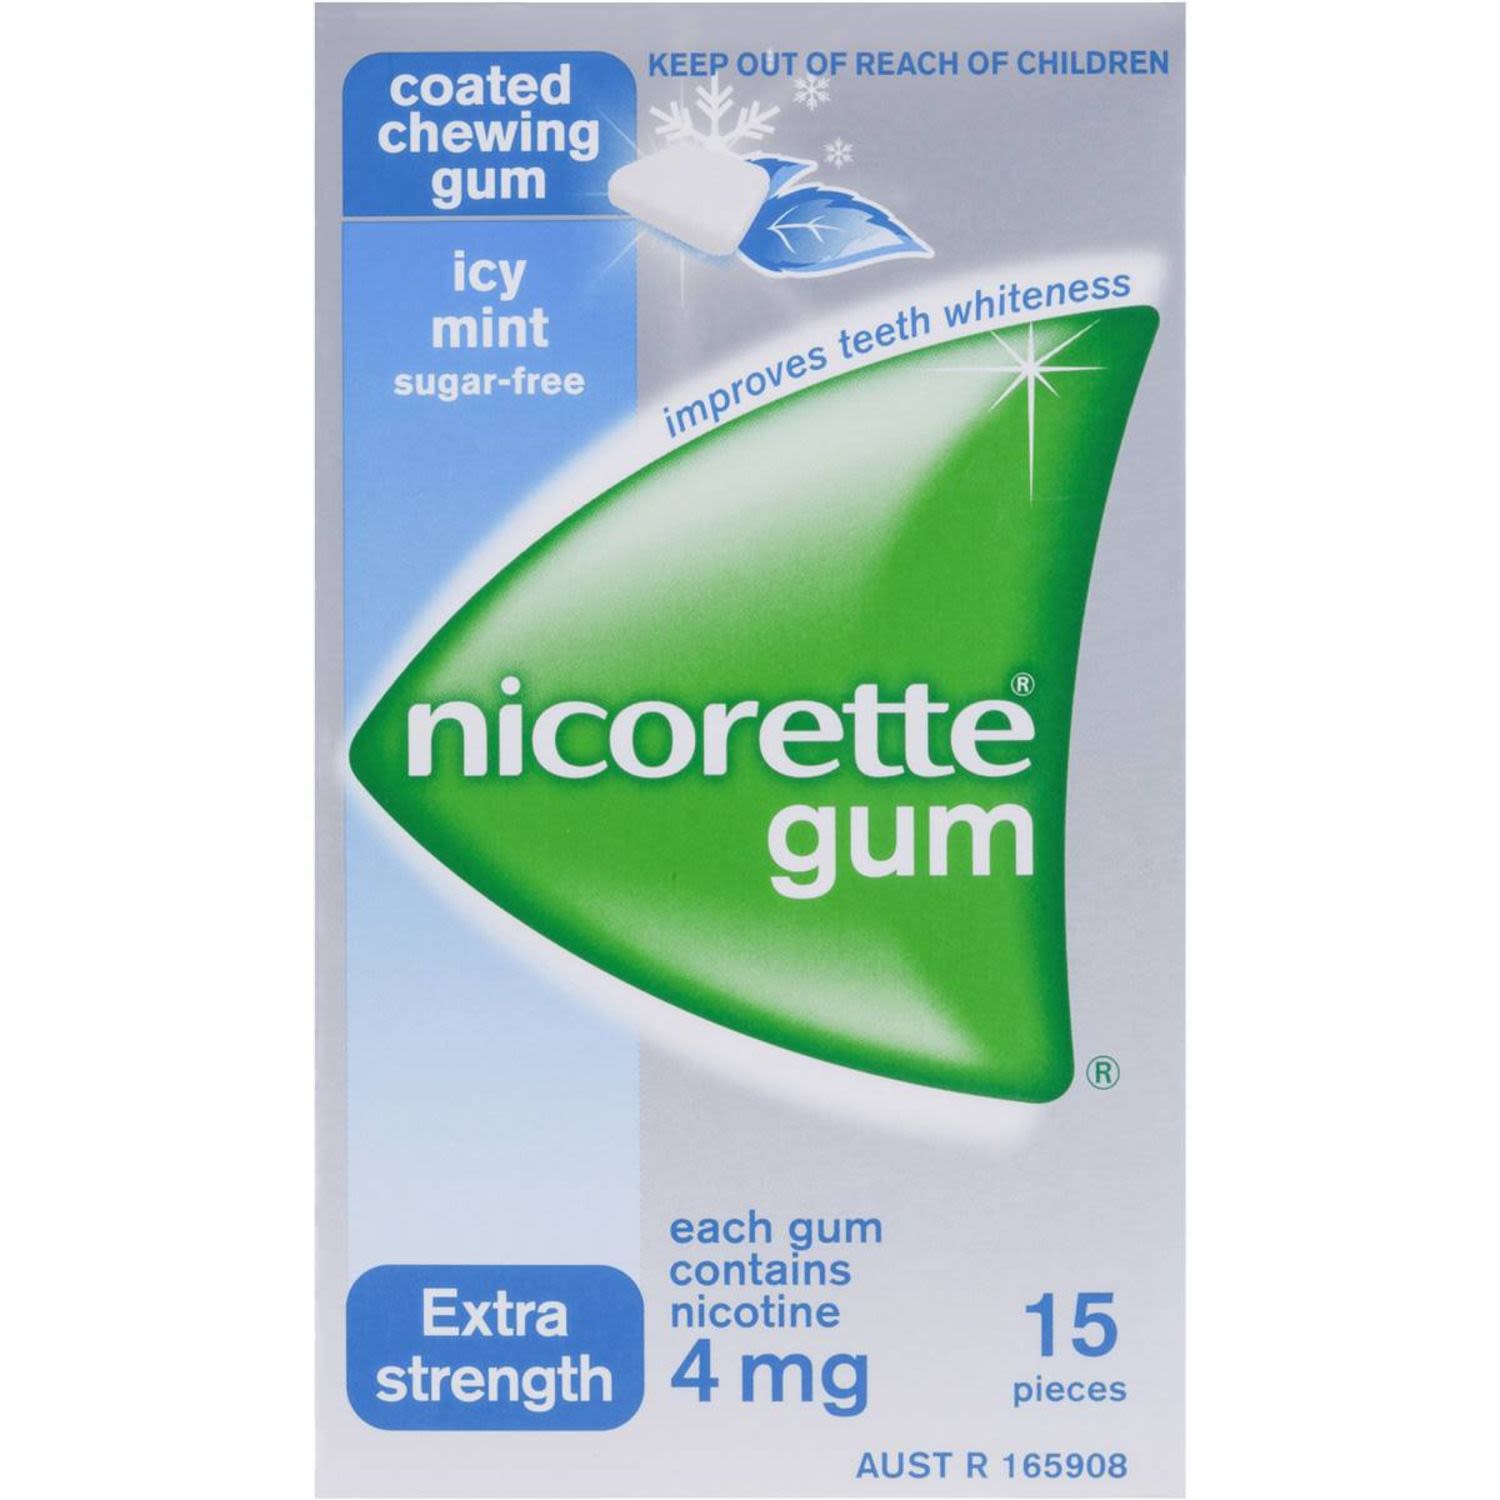 Nicorette Quit Smoking Gum Icy Mint 4mg Extra Strong, 15 Each